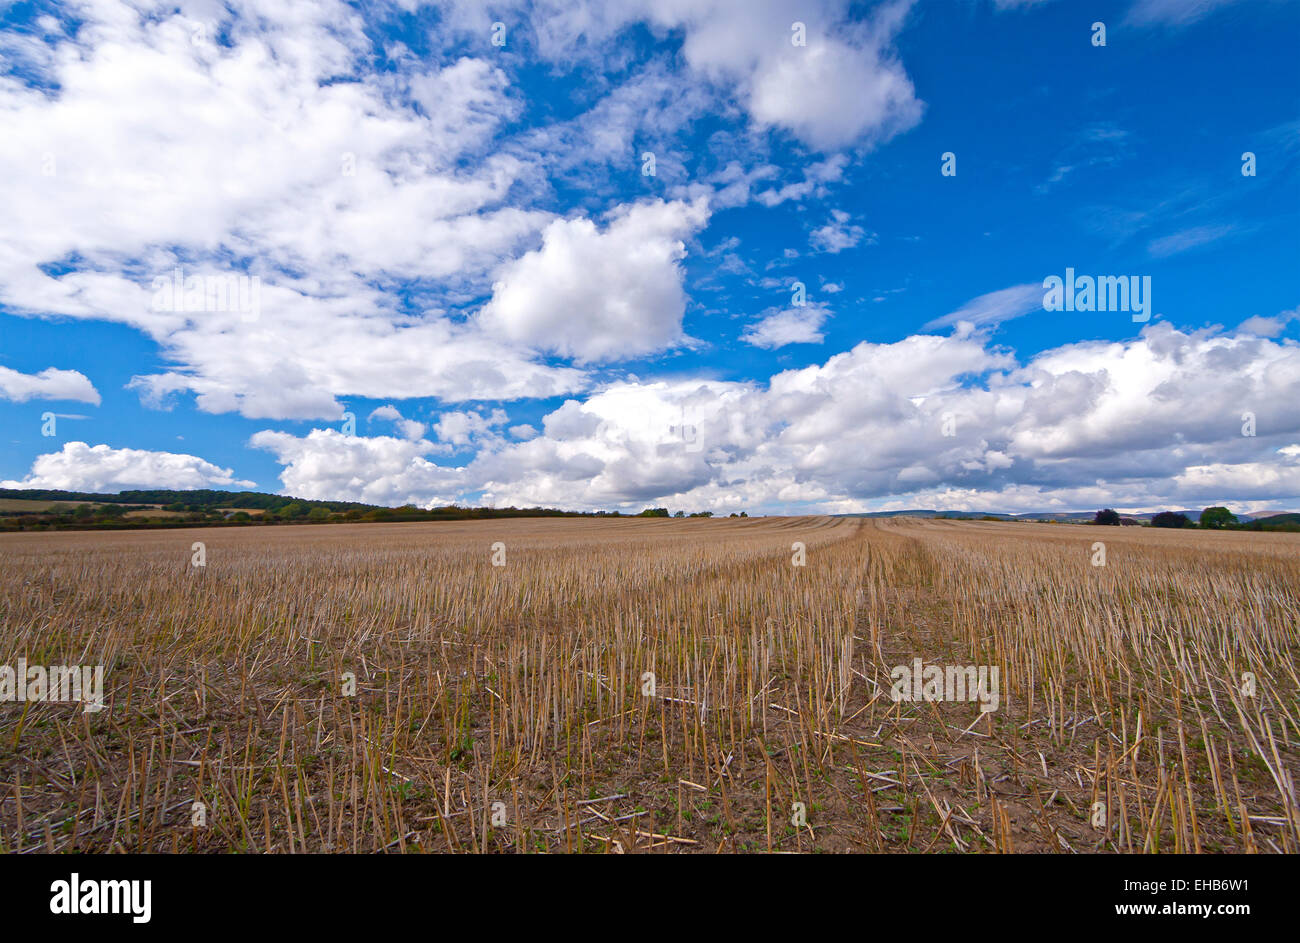 After the harvest, a wheatfield in Autumn, Shropshire, UK Stock Photo